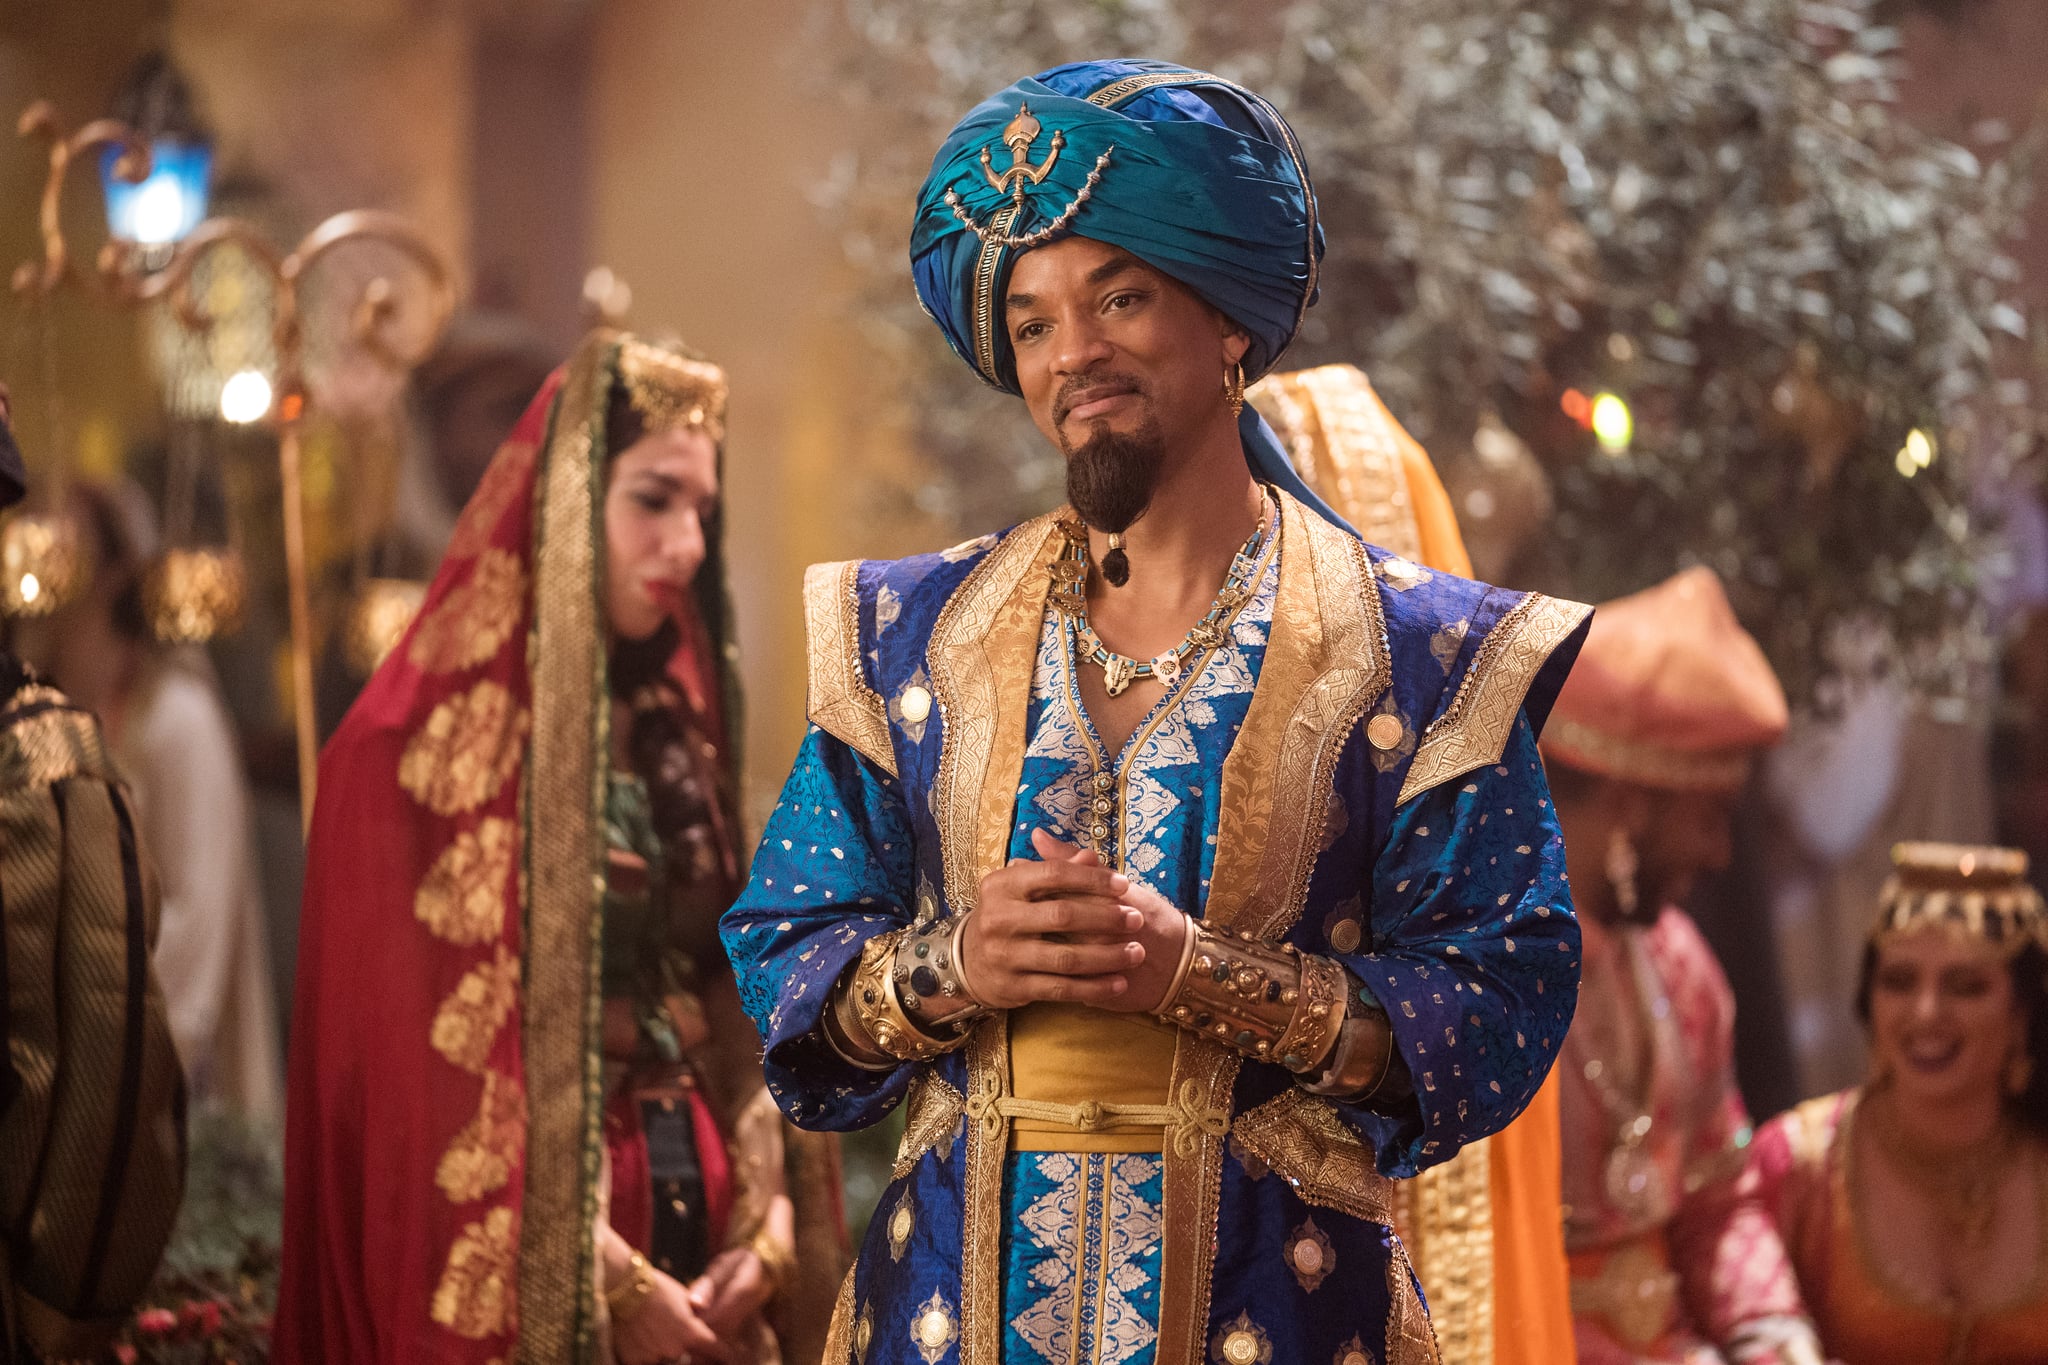 Will Smith is Genie in Disney's live-action ALADDIN., directed by Guy Ritchie.